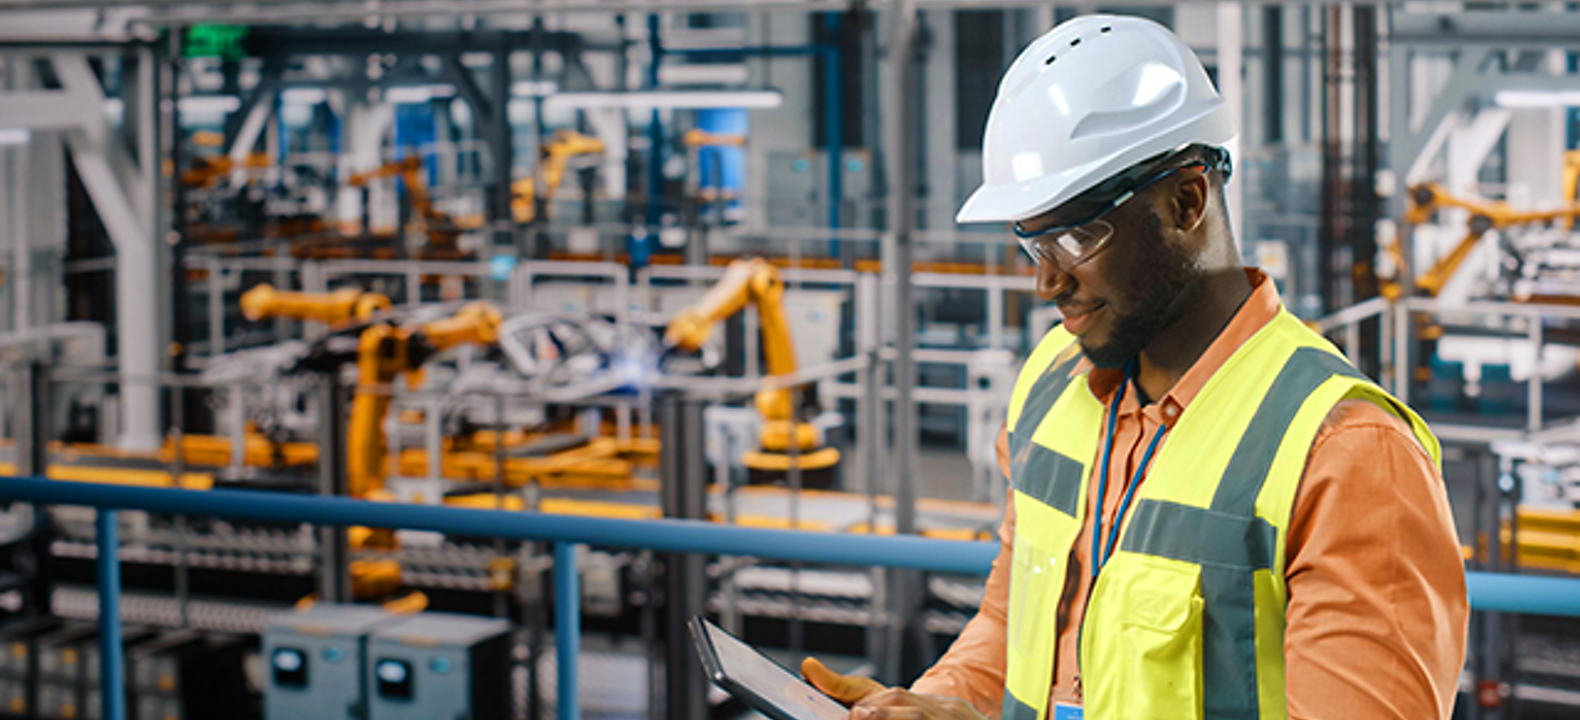 Man in factory setting with hardhat and vest looks down at a tablet.